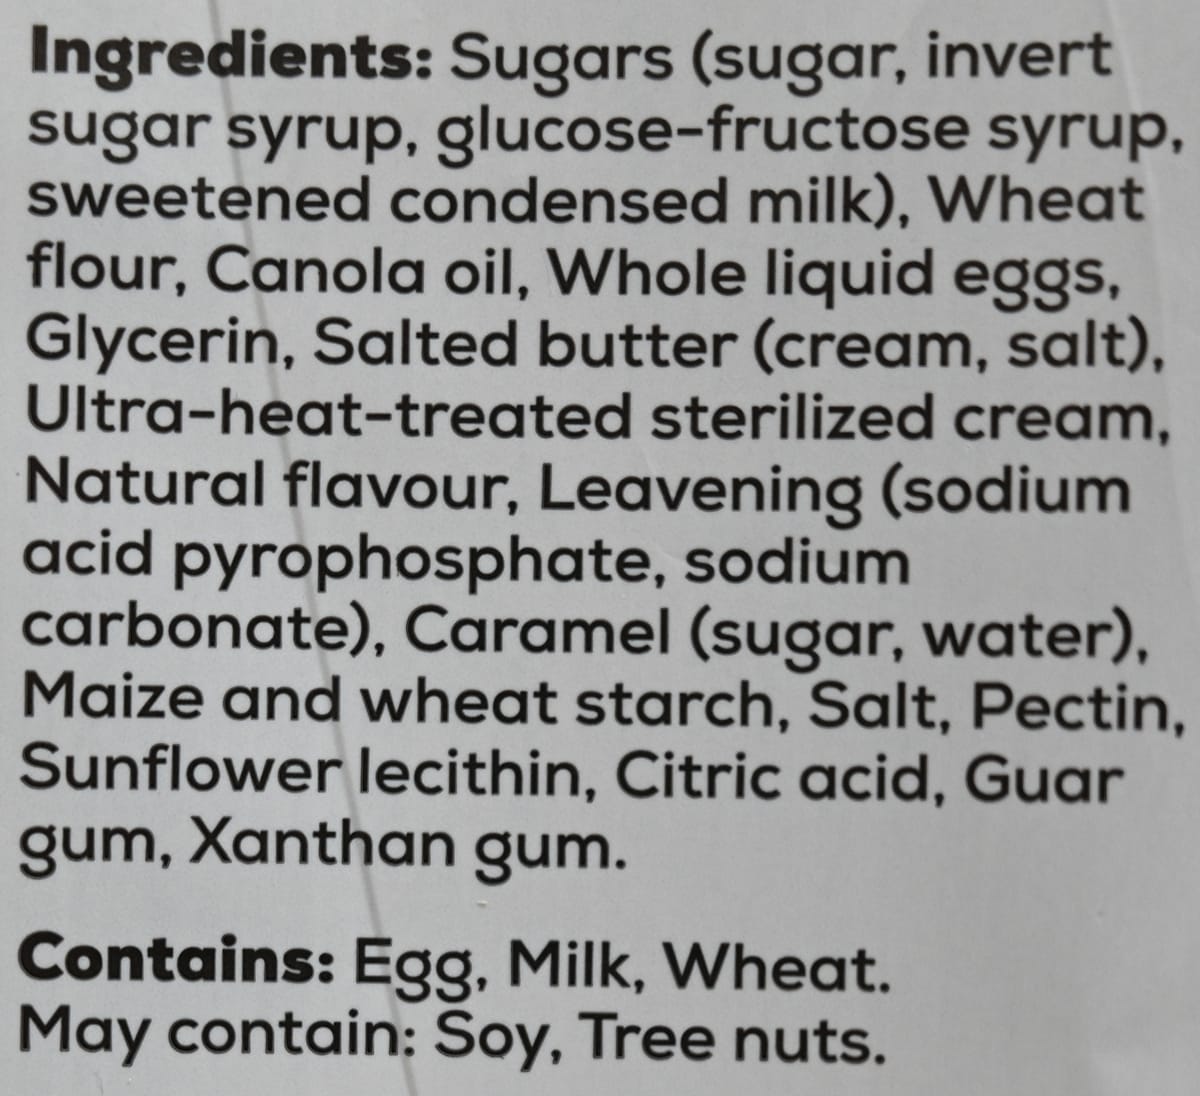 Image of the ingredients for the muffin bites from the back of the package.